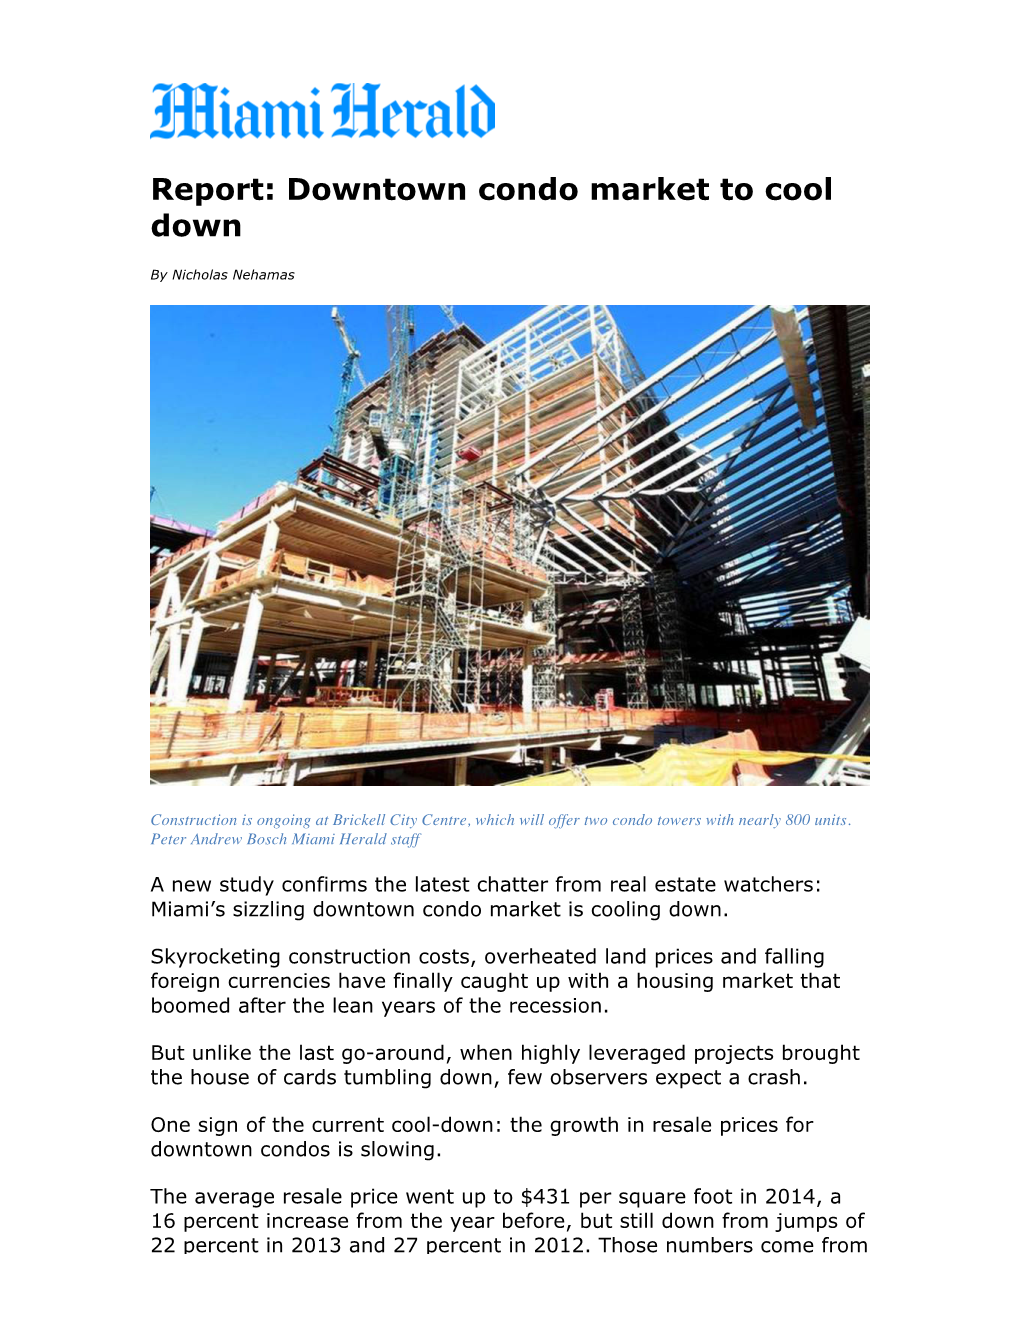 Downtown Condo Market to Cool Down